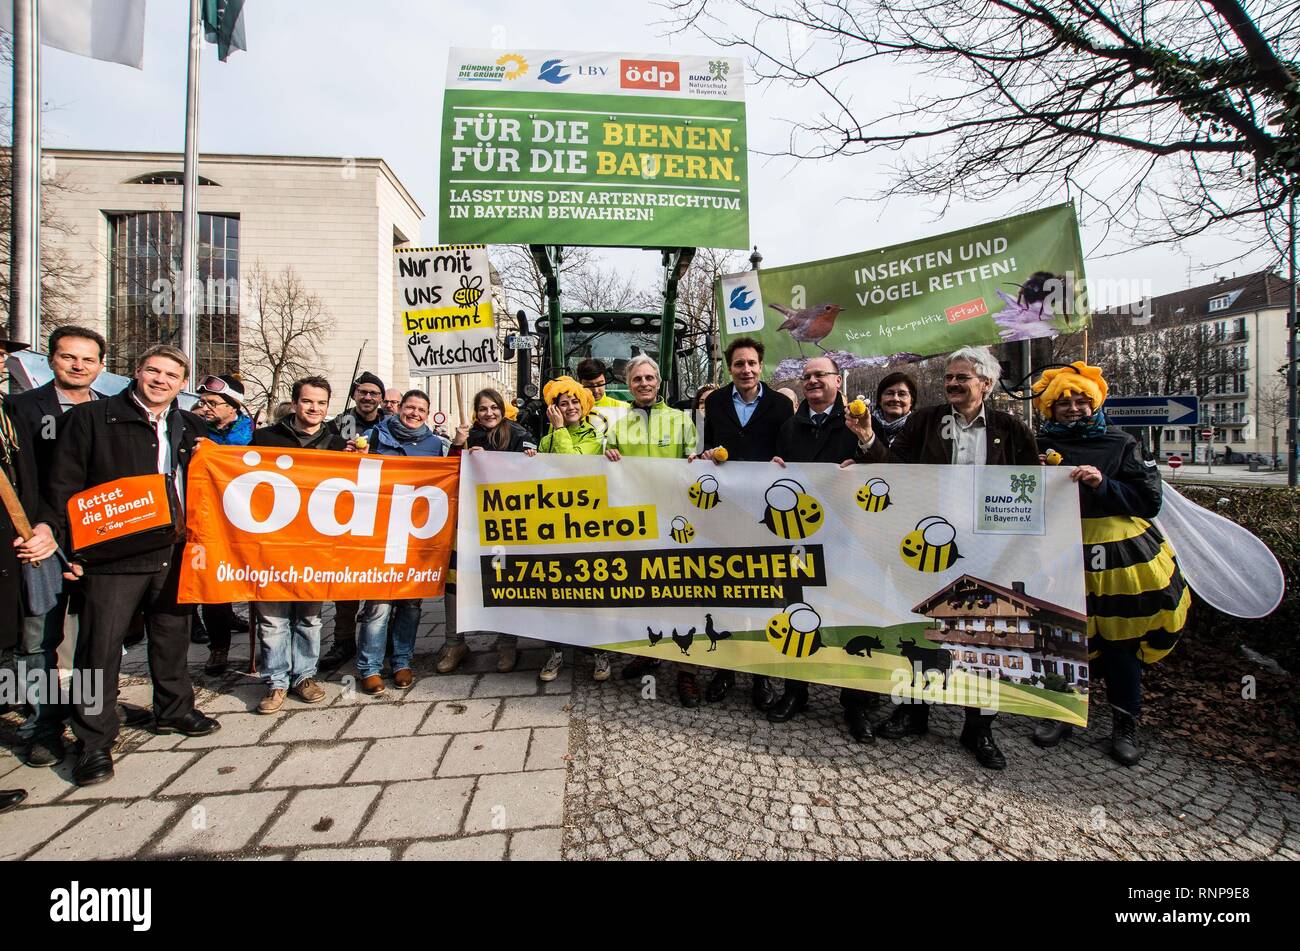 Munich, Bavaria, Germany. 20th Feb, 2019. After being deemed the most successful citizen initiative in the history of Bavaria with over 1.7 million signatures collected representing 18.4% of Bavaria, the groups behind the Volksbegehren Artenvielfalt, aka Save the Bees and Citizens' Initiative Species Diversity continue their work towards entering the initiative into law. The Save the Bees initiative is designed to put measures into place to not only prevent die offs of bees, but of various species throughout Bavaria, with the actors hoping Bavaria becomes an example for other regions w Stock Photo